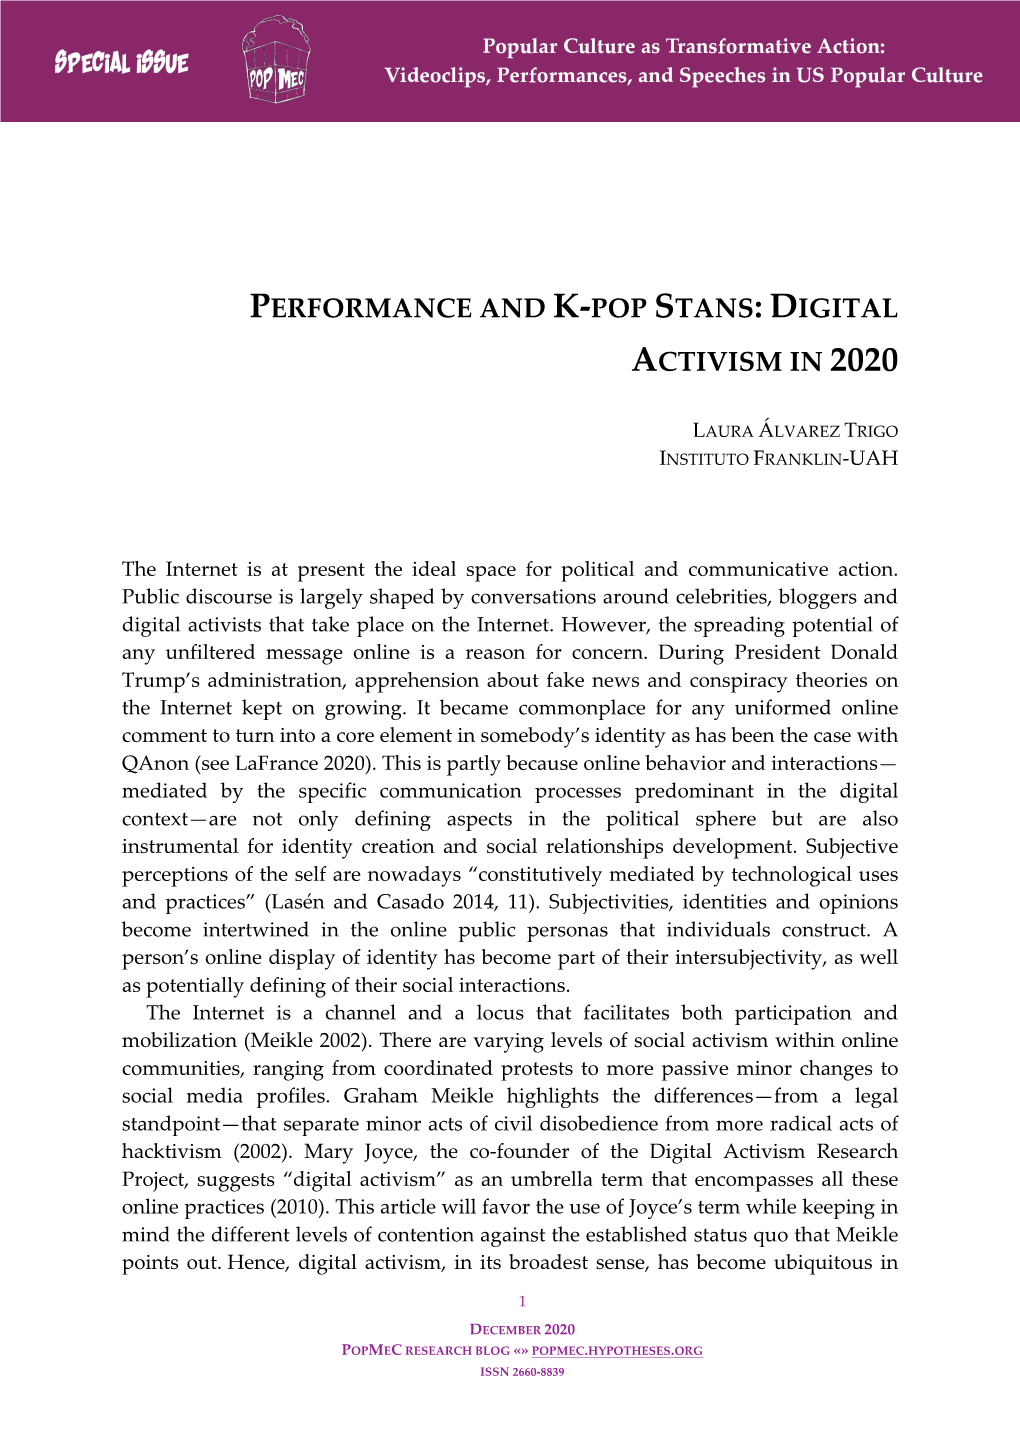 Performance and K-Pop Stans: Digital Activism in 2020